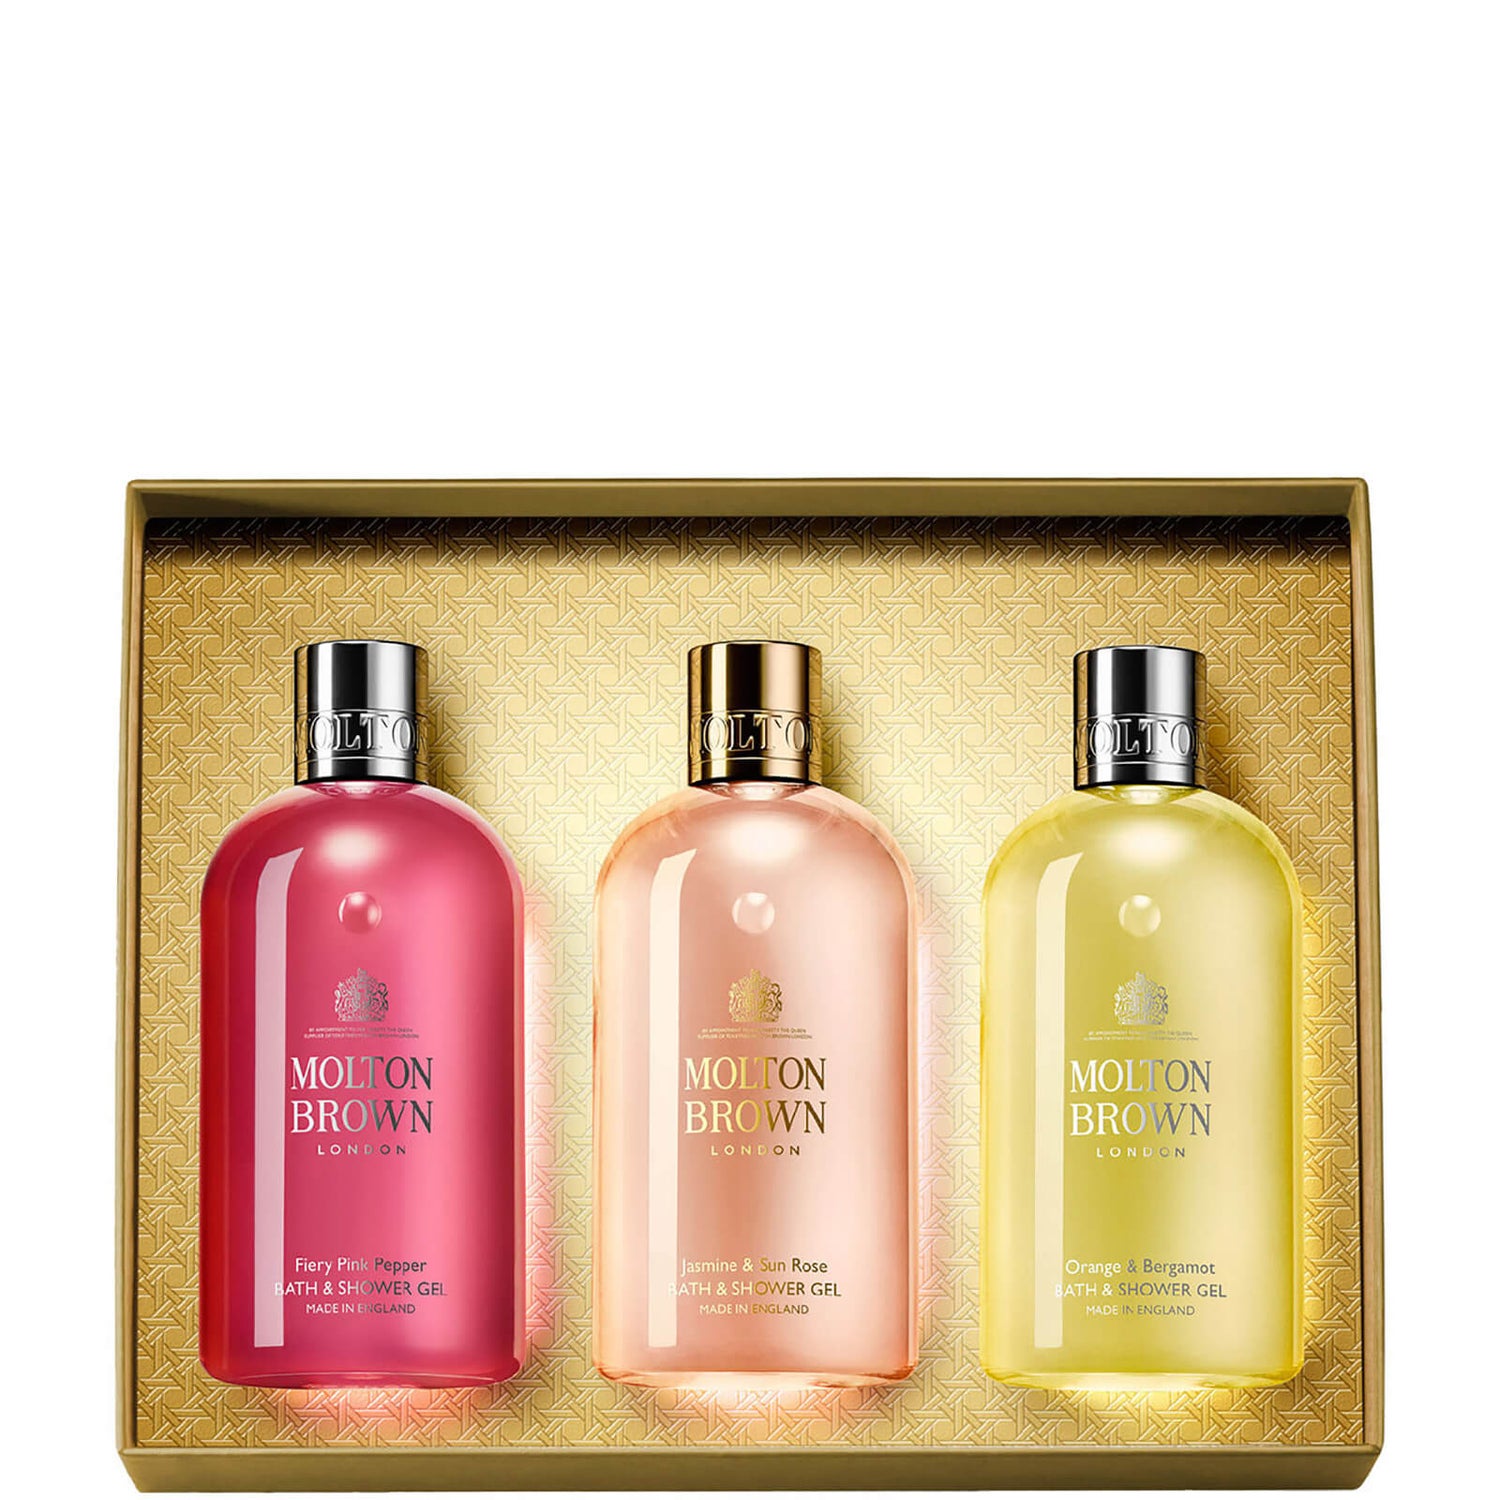 Molton Brown Floral and Spicy Bathing Gift Set | lookfantastic HK